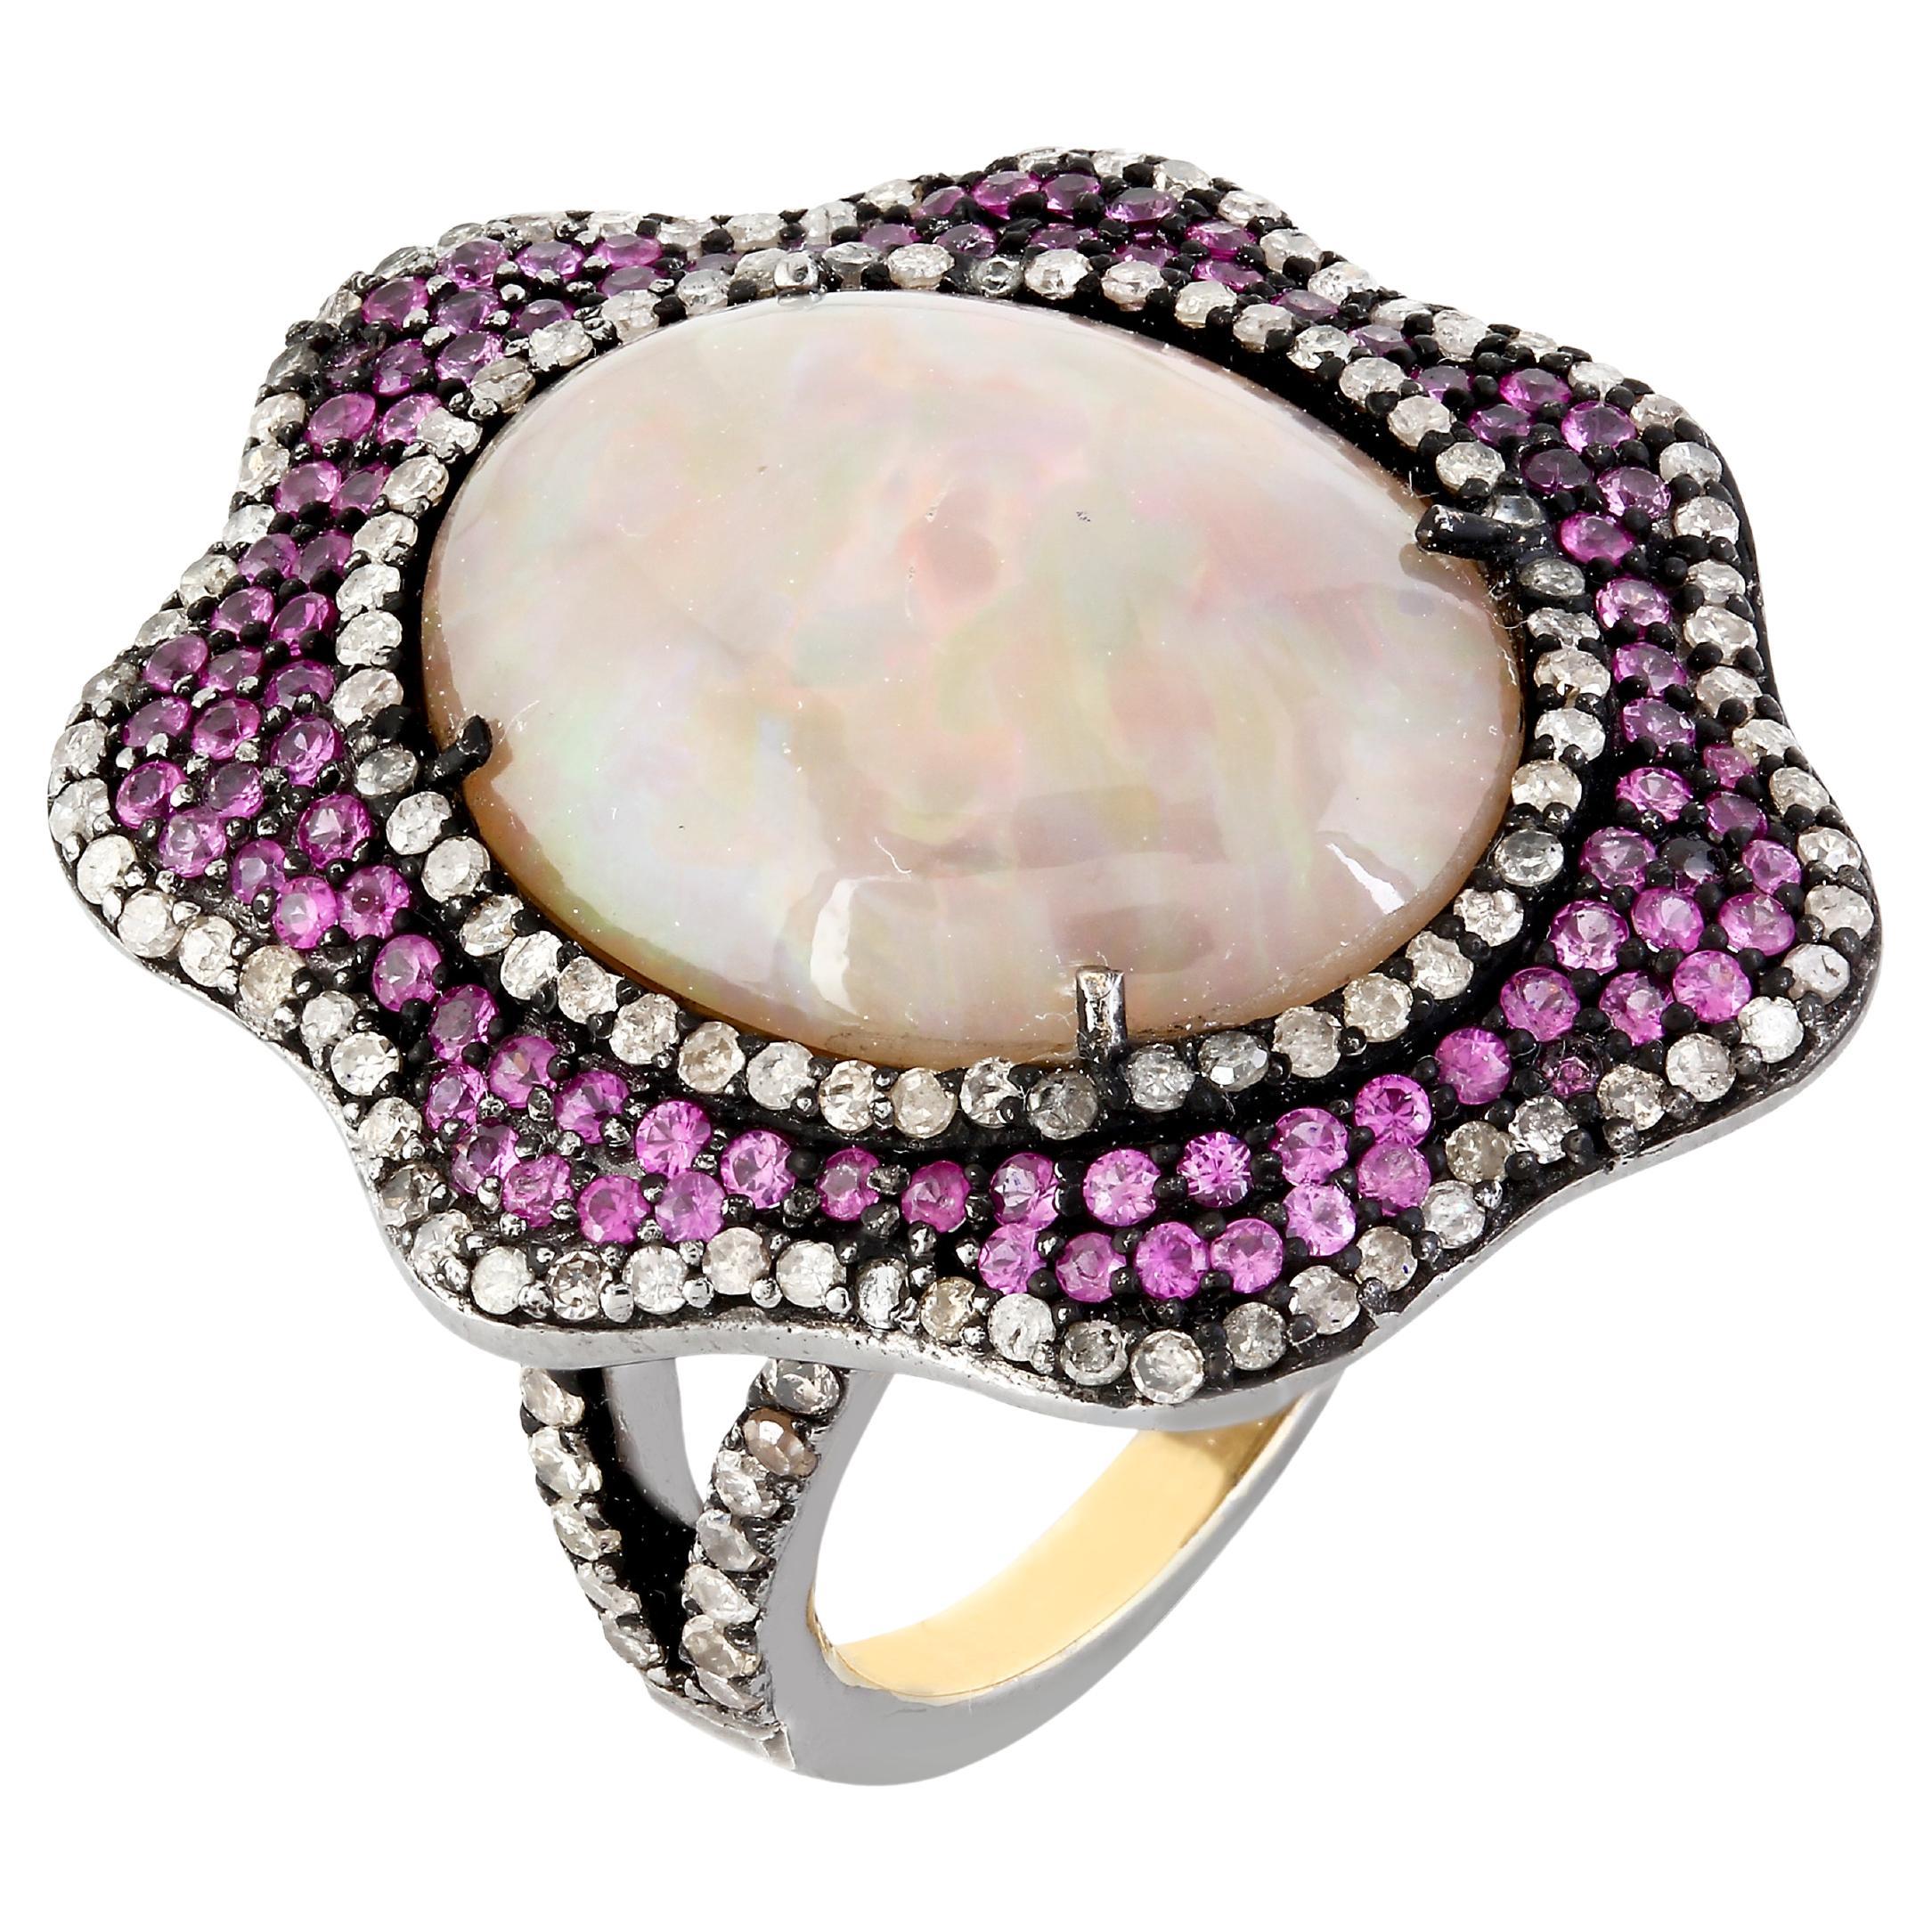 Victorian 9.4cttw. Opal, Ruby and Diamond Split Shank Ring in 18k / 925 Silver